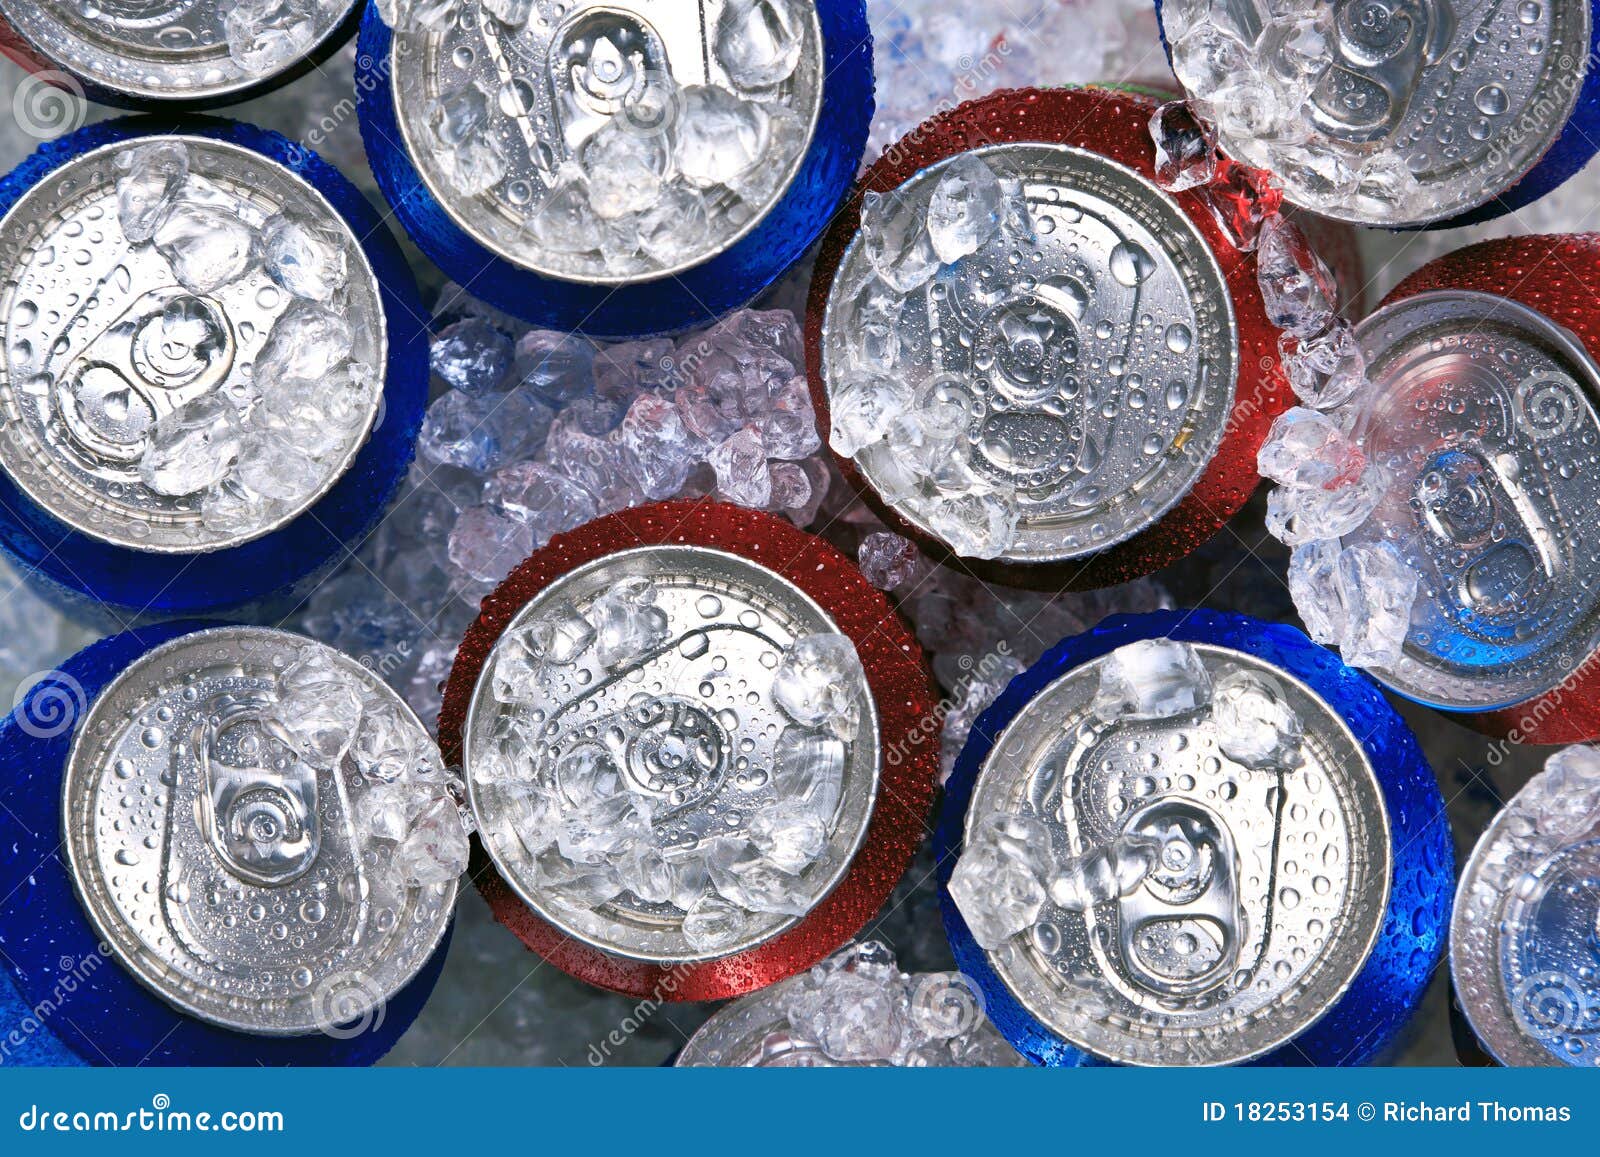 cans of drink on crushed ice